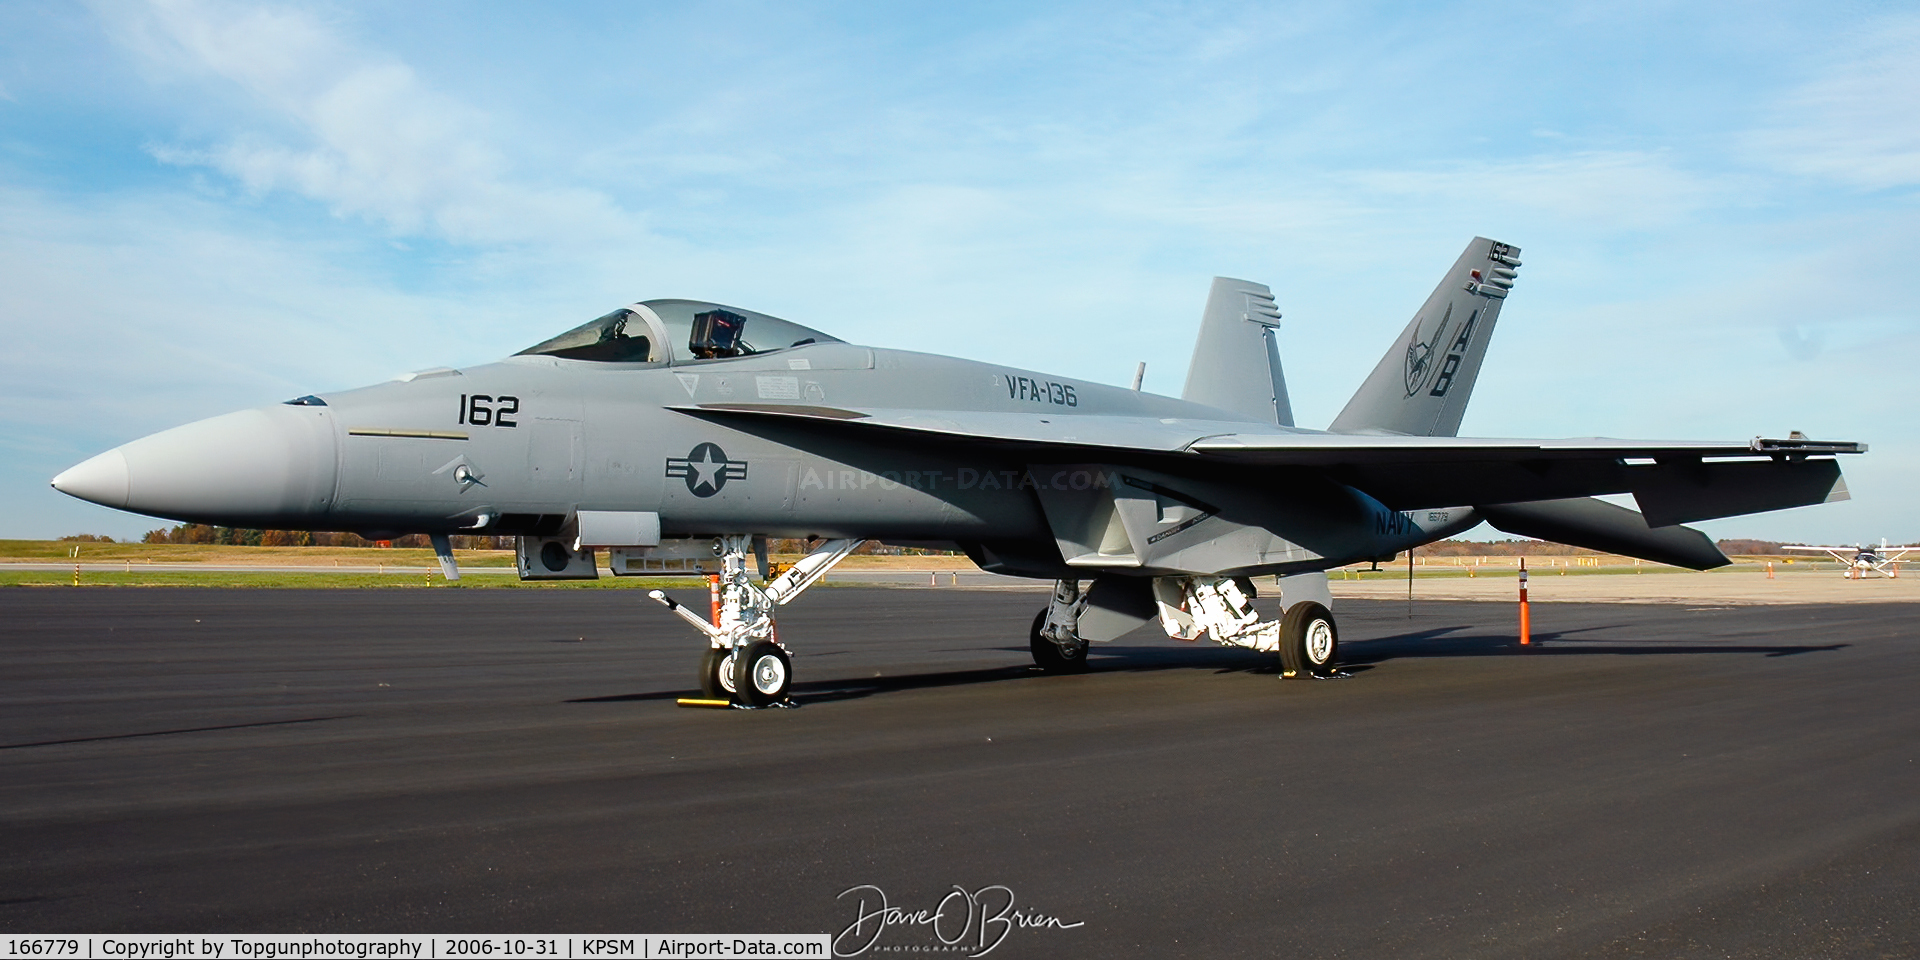 166779, 2006 Boeing F/A-18E Super Hornet C/N E125, Brand new SH stops by after a shake down flight from the factory. Next stop NAS Oceana.